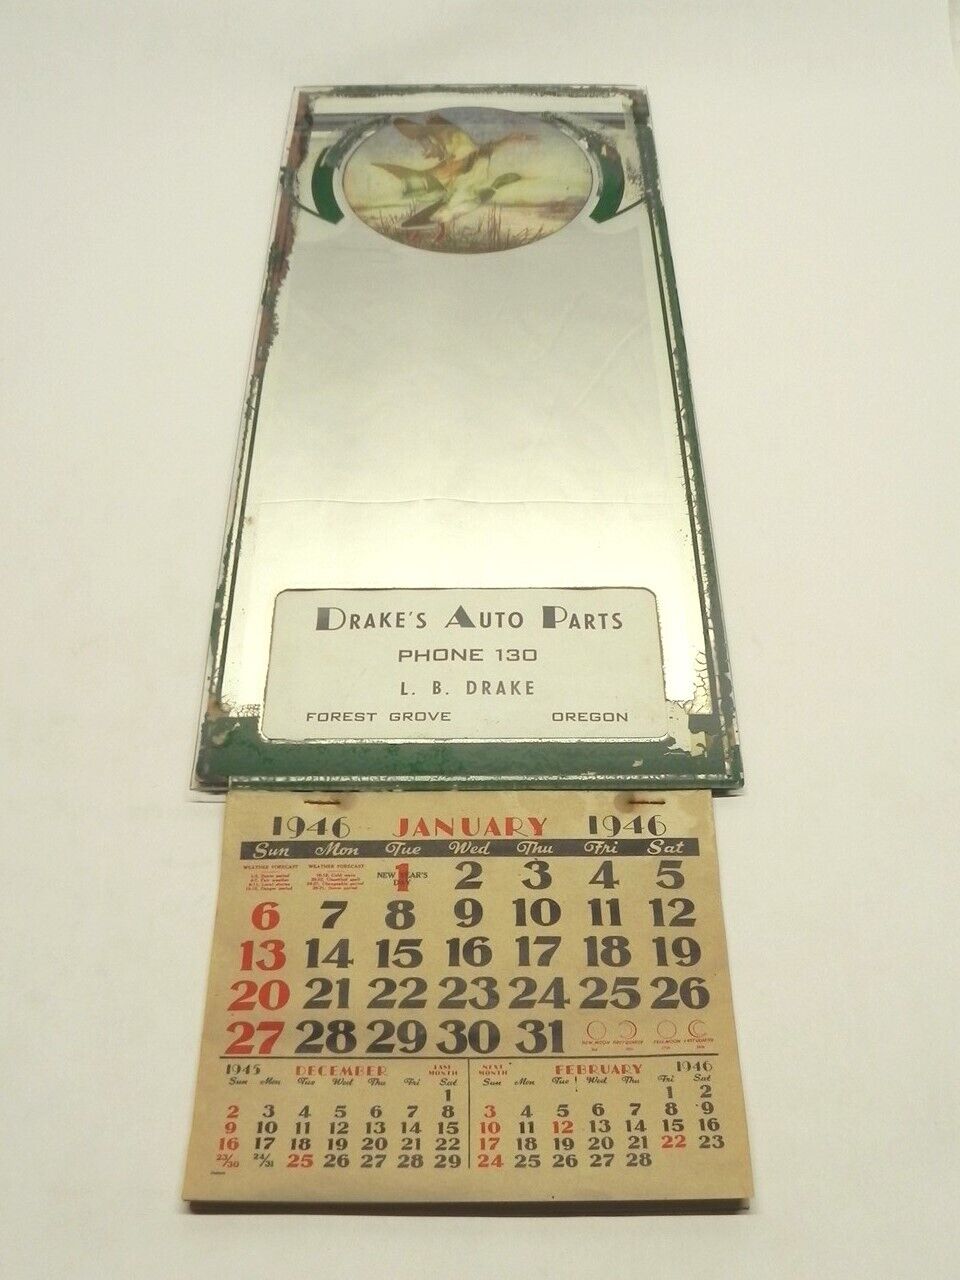 VINTAGE 1946 DISPLAY CALENDAR MIRROR DRAKE'S AUTO PARTS FOREST GROVE, OR USED 